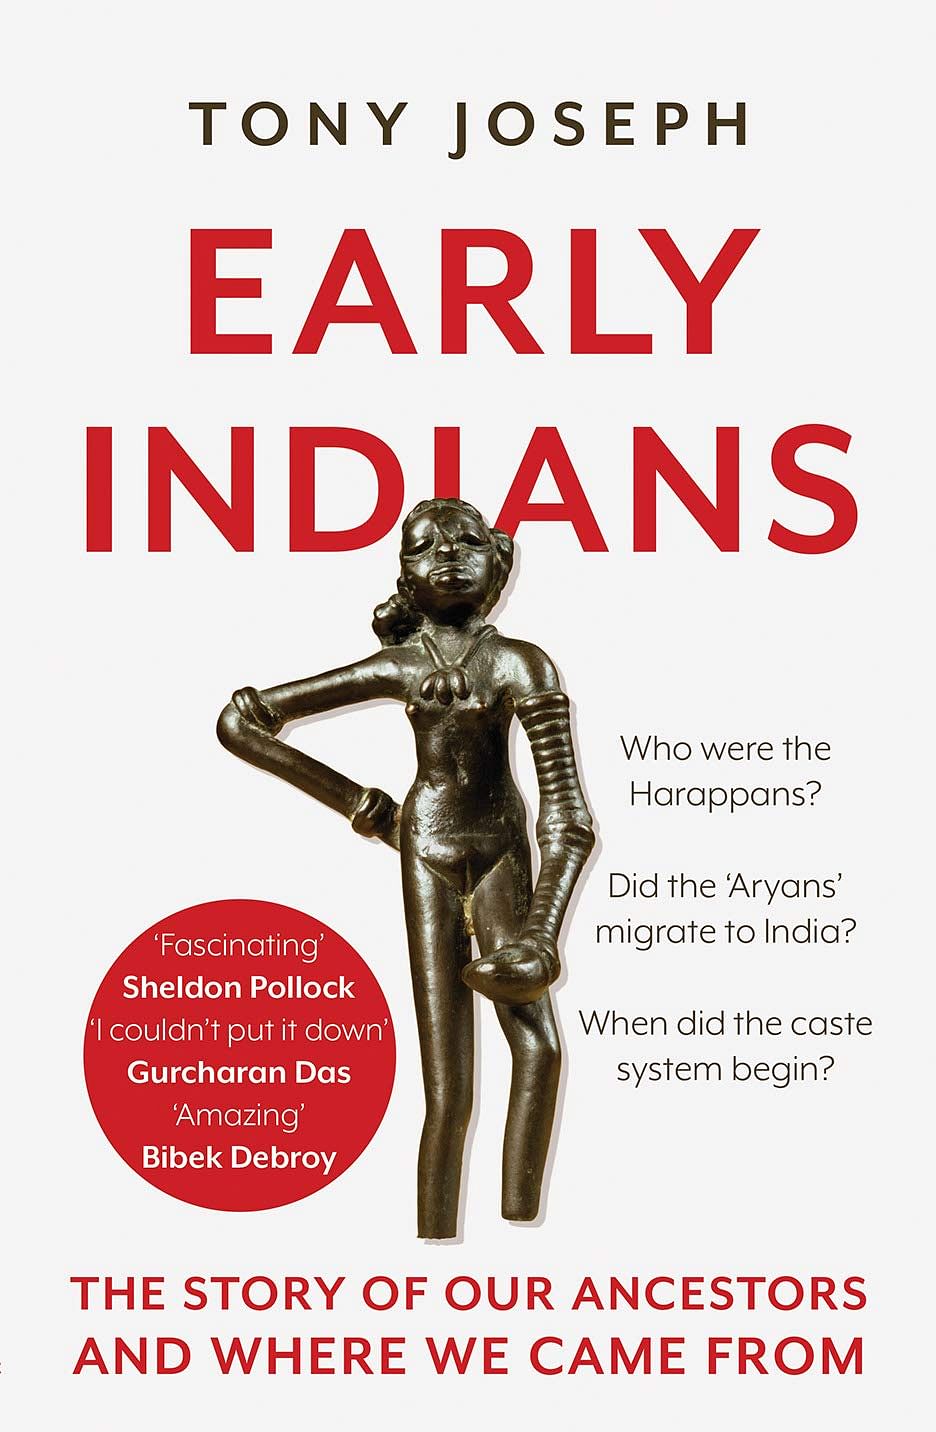 An excerpt from Tony Joseph’s ‘Early Indians’ traces the origins of modern humans in India.